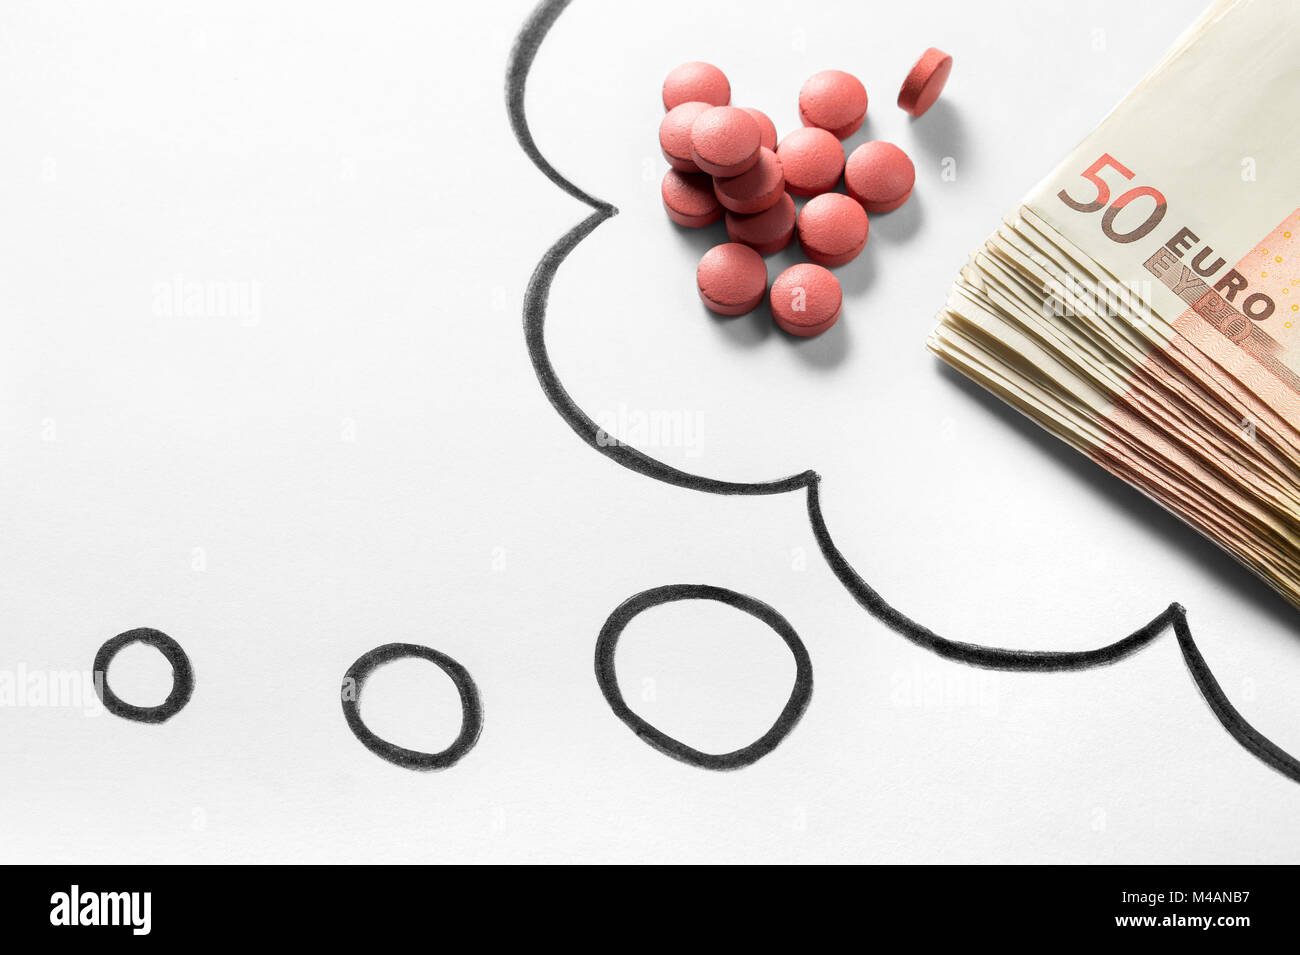 Medical business or prices concept. Thinking about money in pharmaceutical industry or high medical expenses. Also drug dealing, dealer or trade. Stock Photo